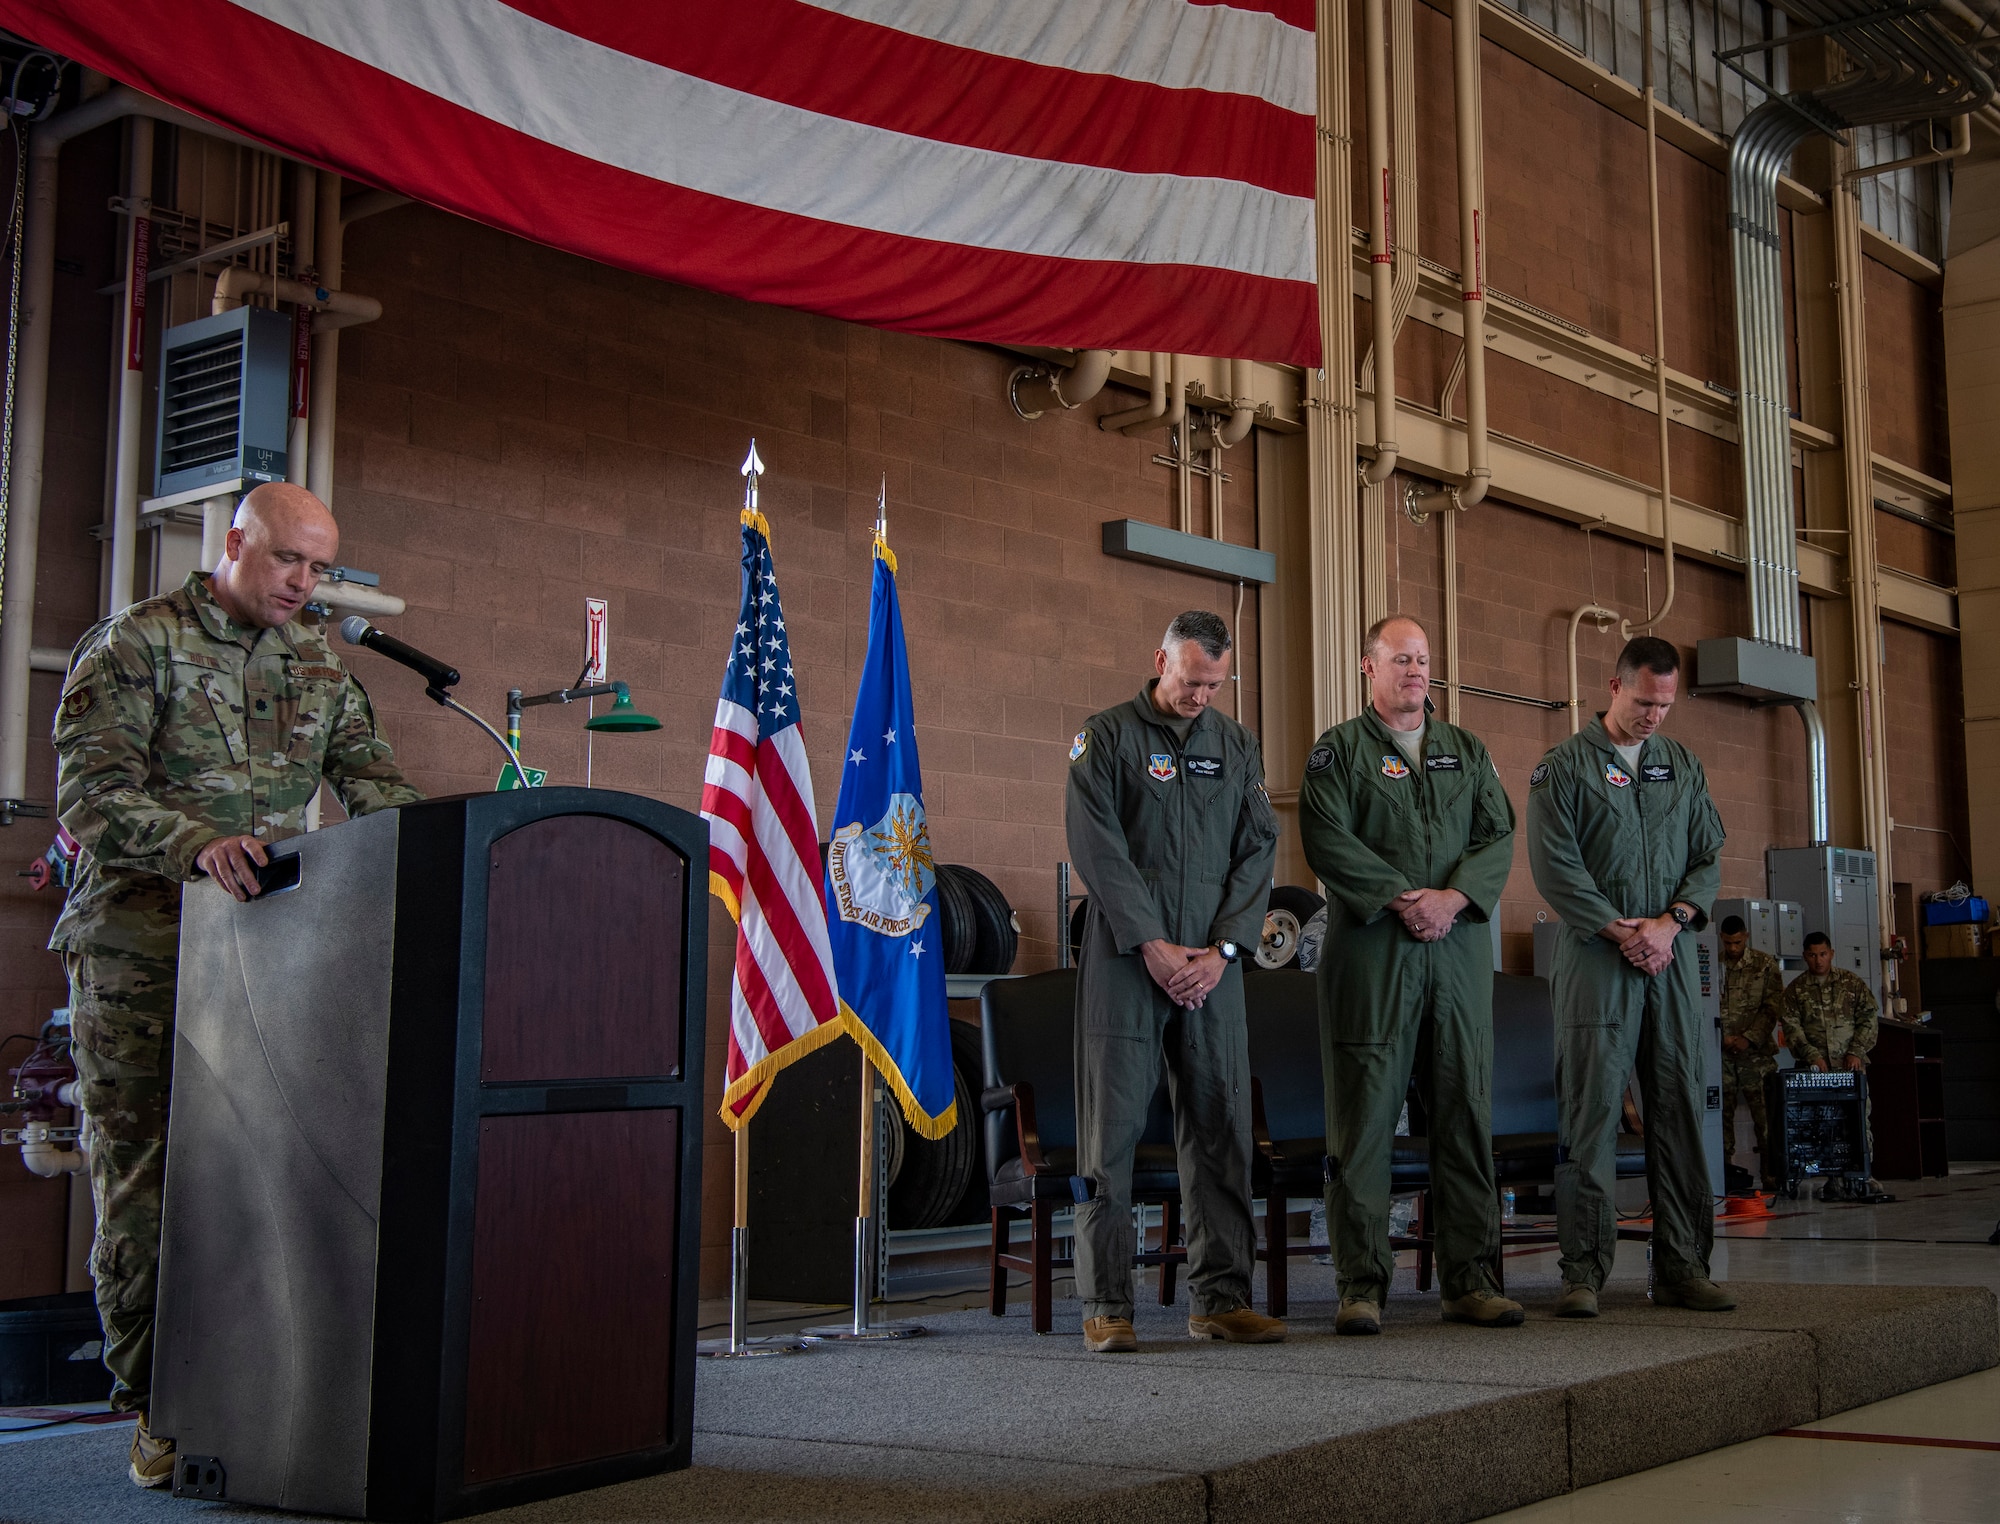 An Airman prays at a podium as three Airmen stand by on the stage.